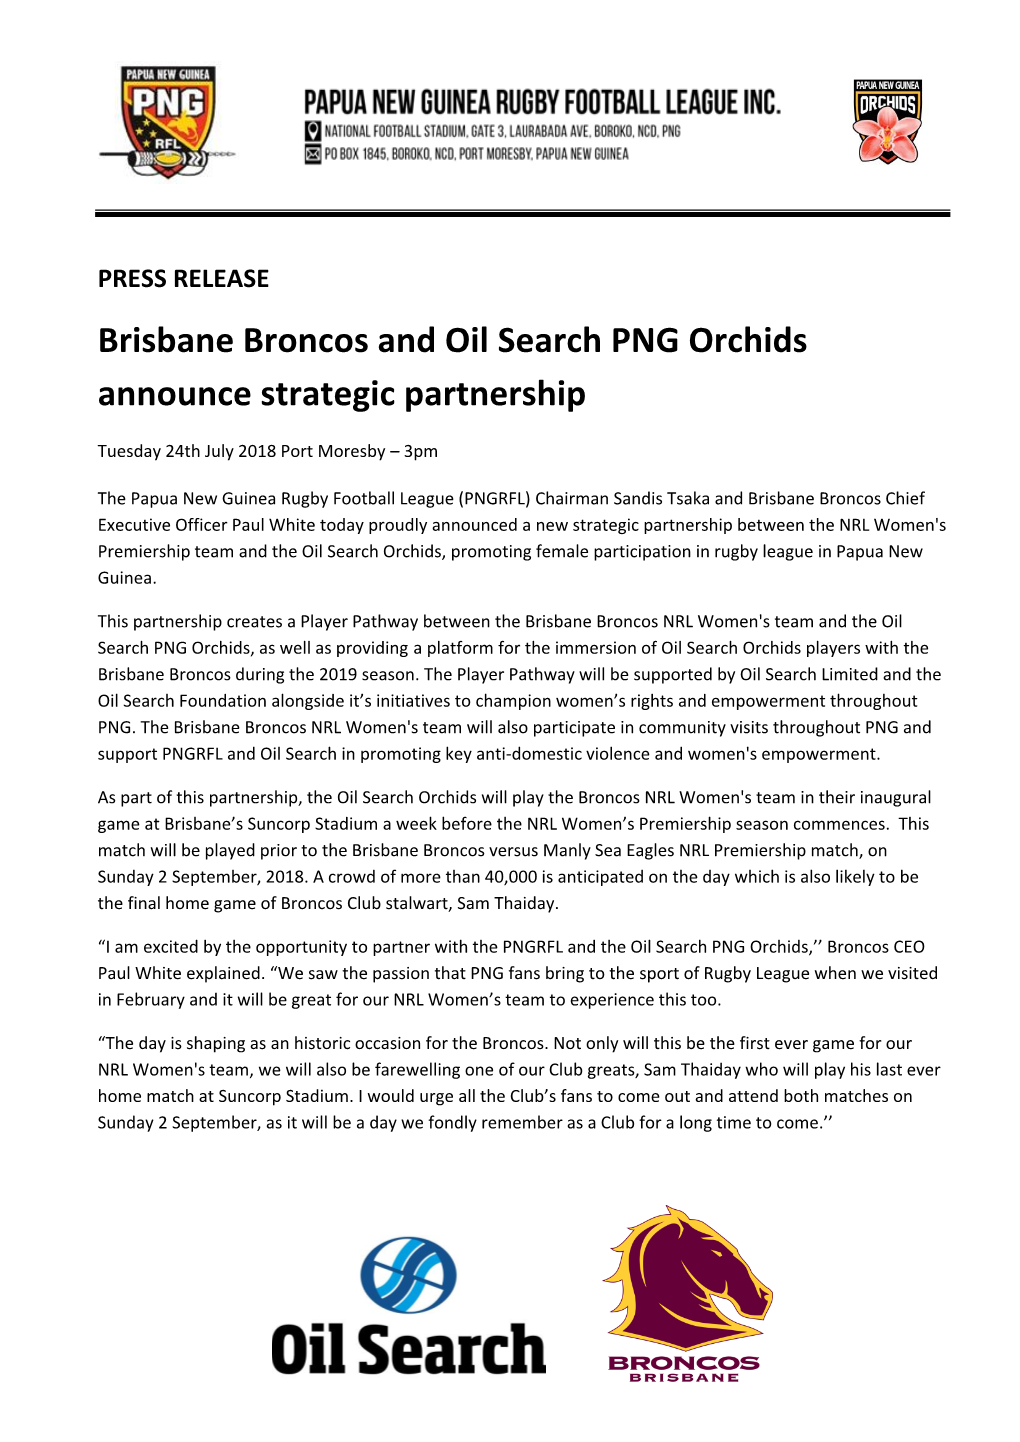 Brisbane Broncos and Oil Search PNG Orchids Announce Strategic Partnership